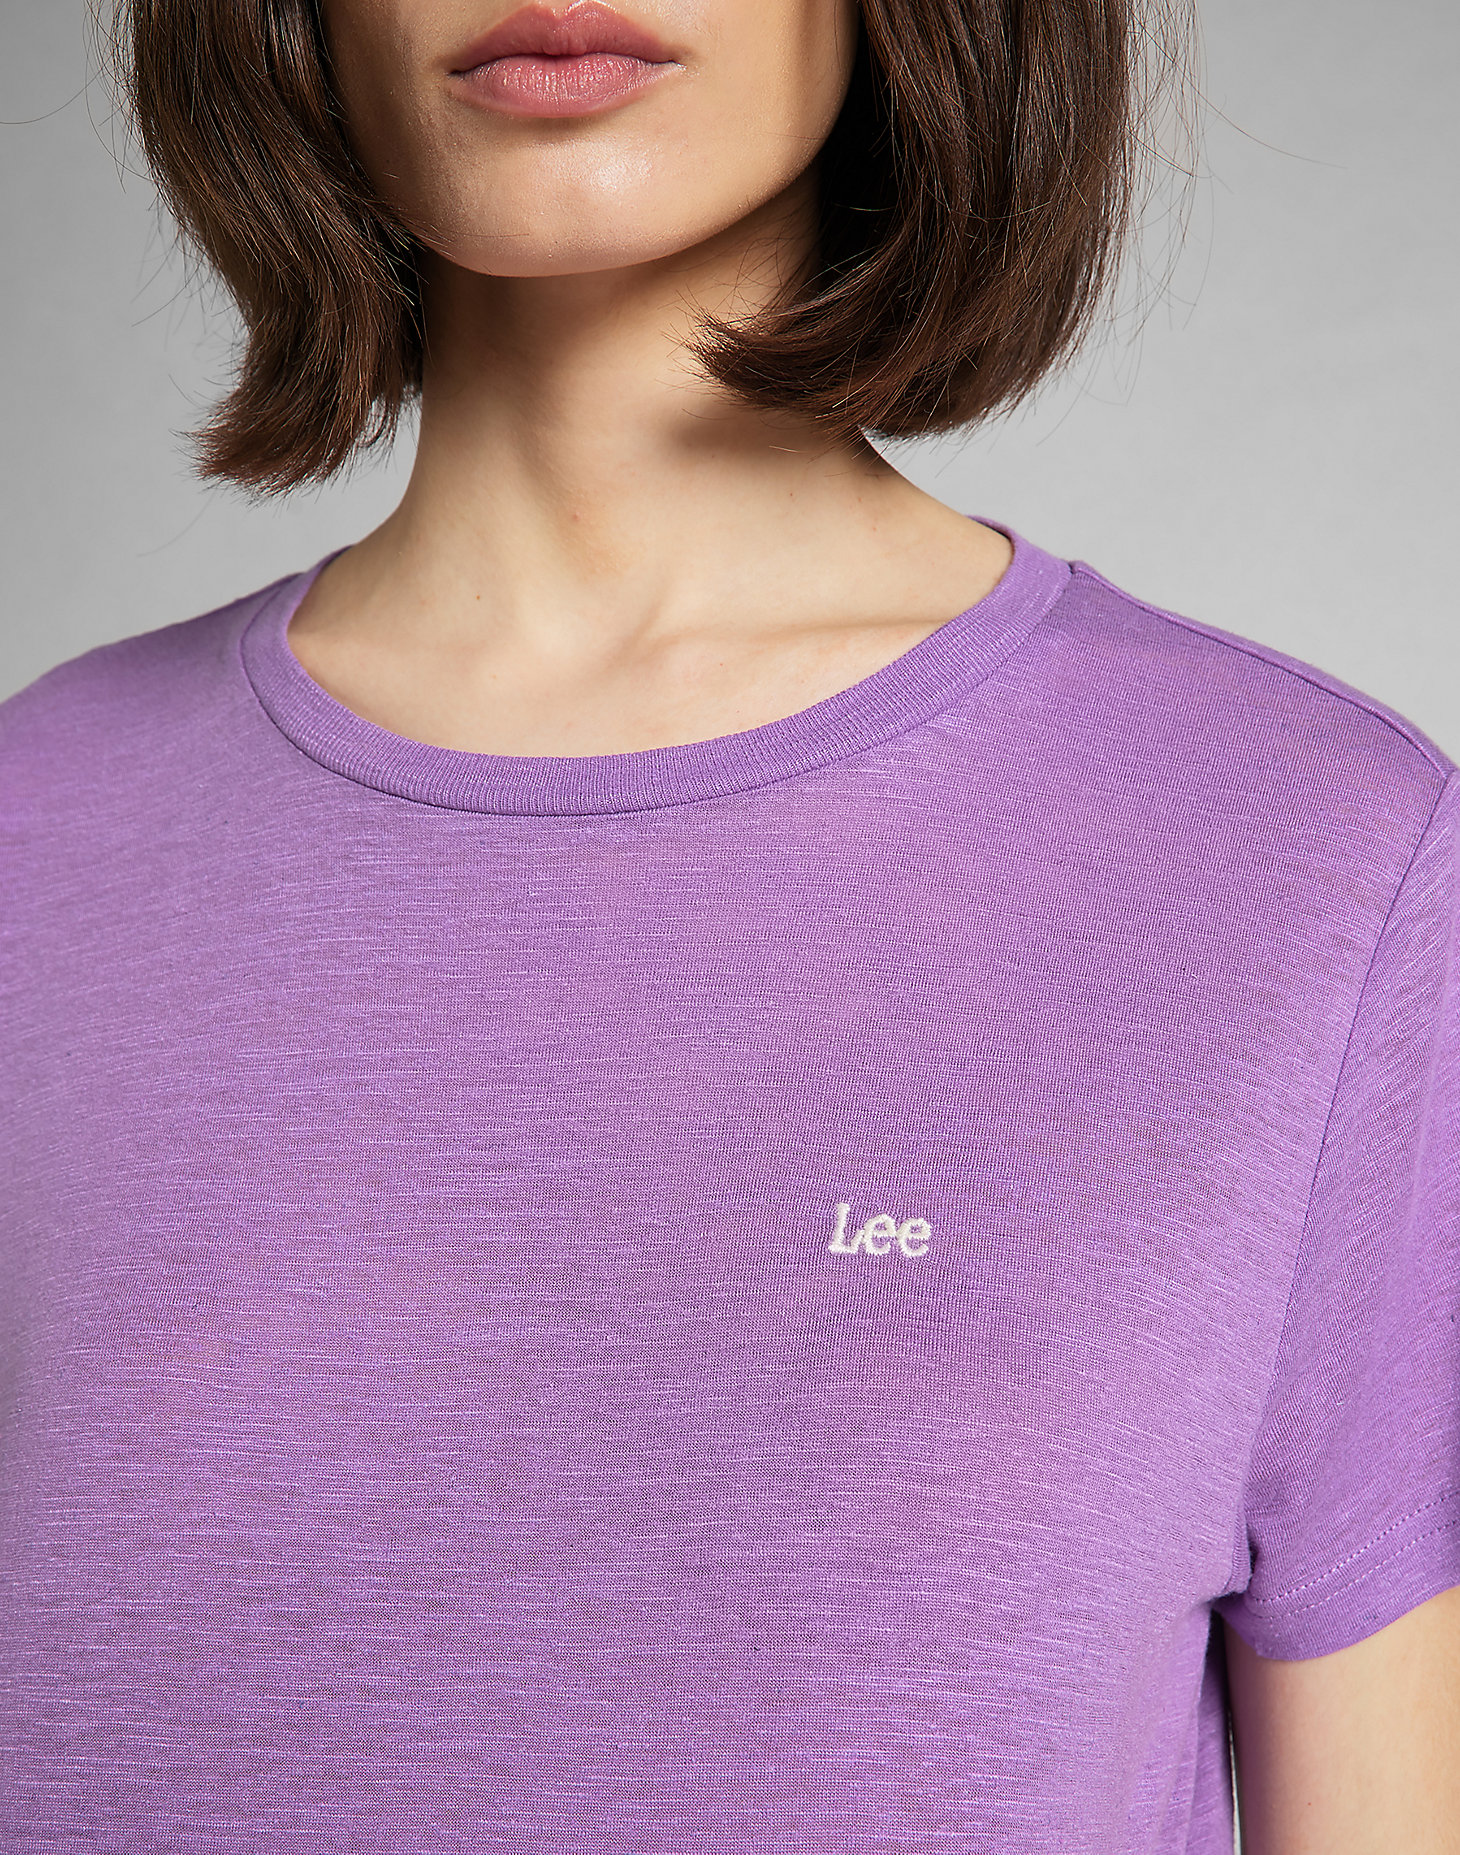 Crew Tee in Amethyst Orchid alternative view 4